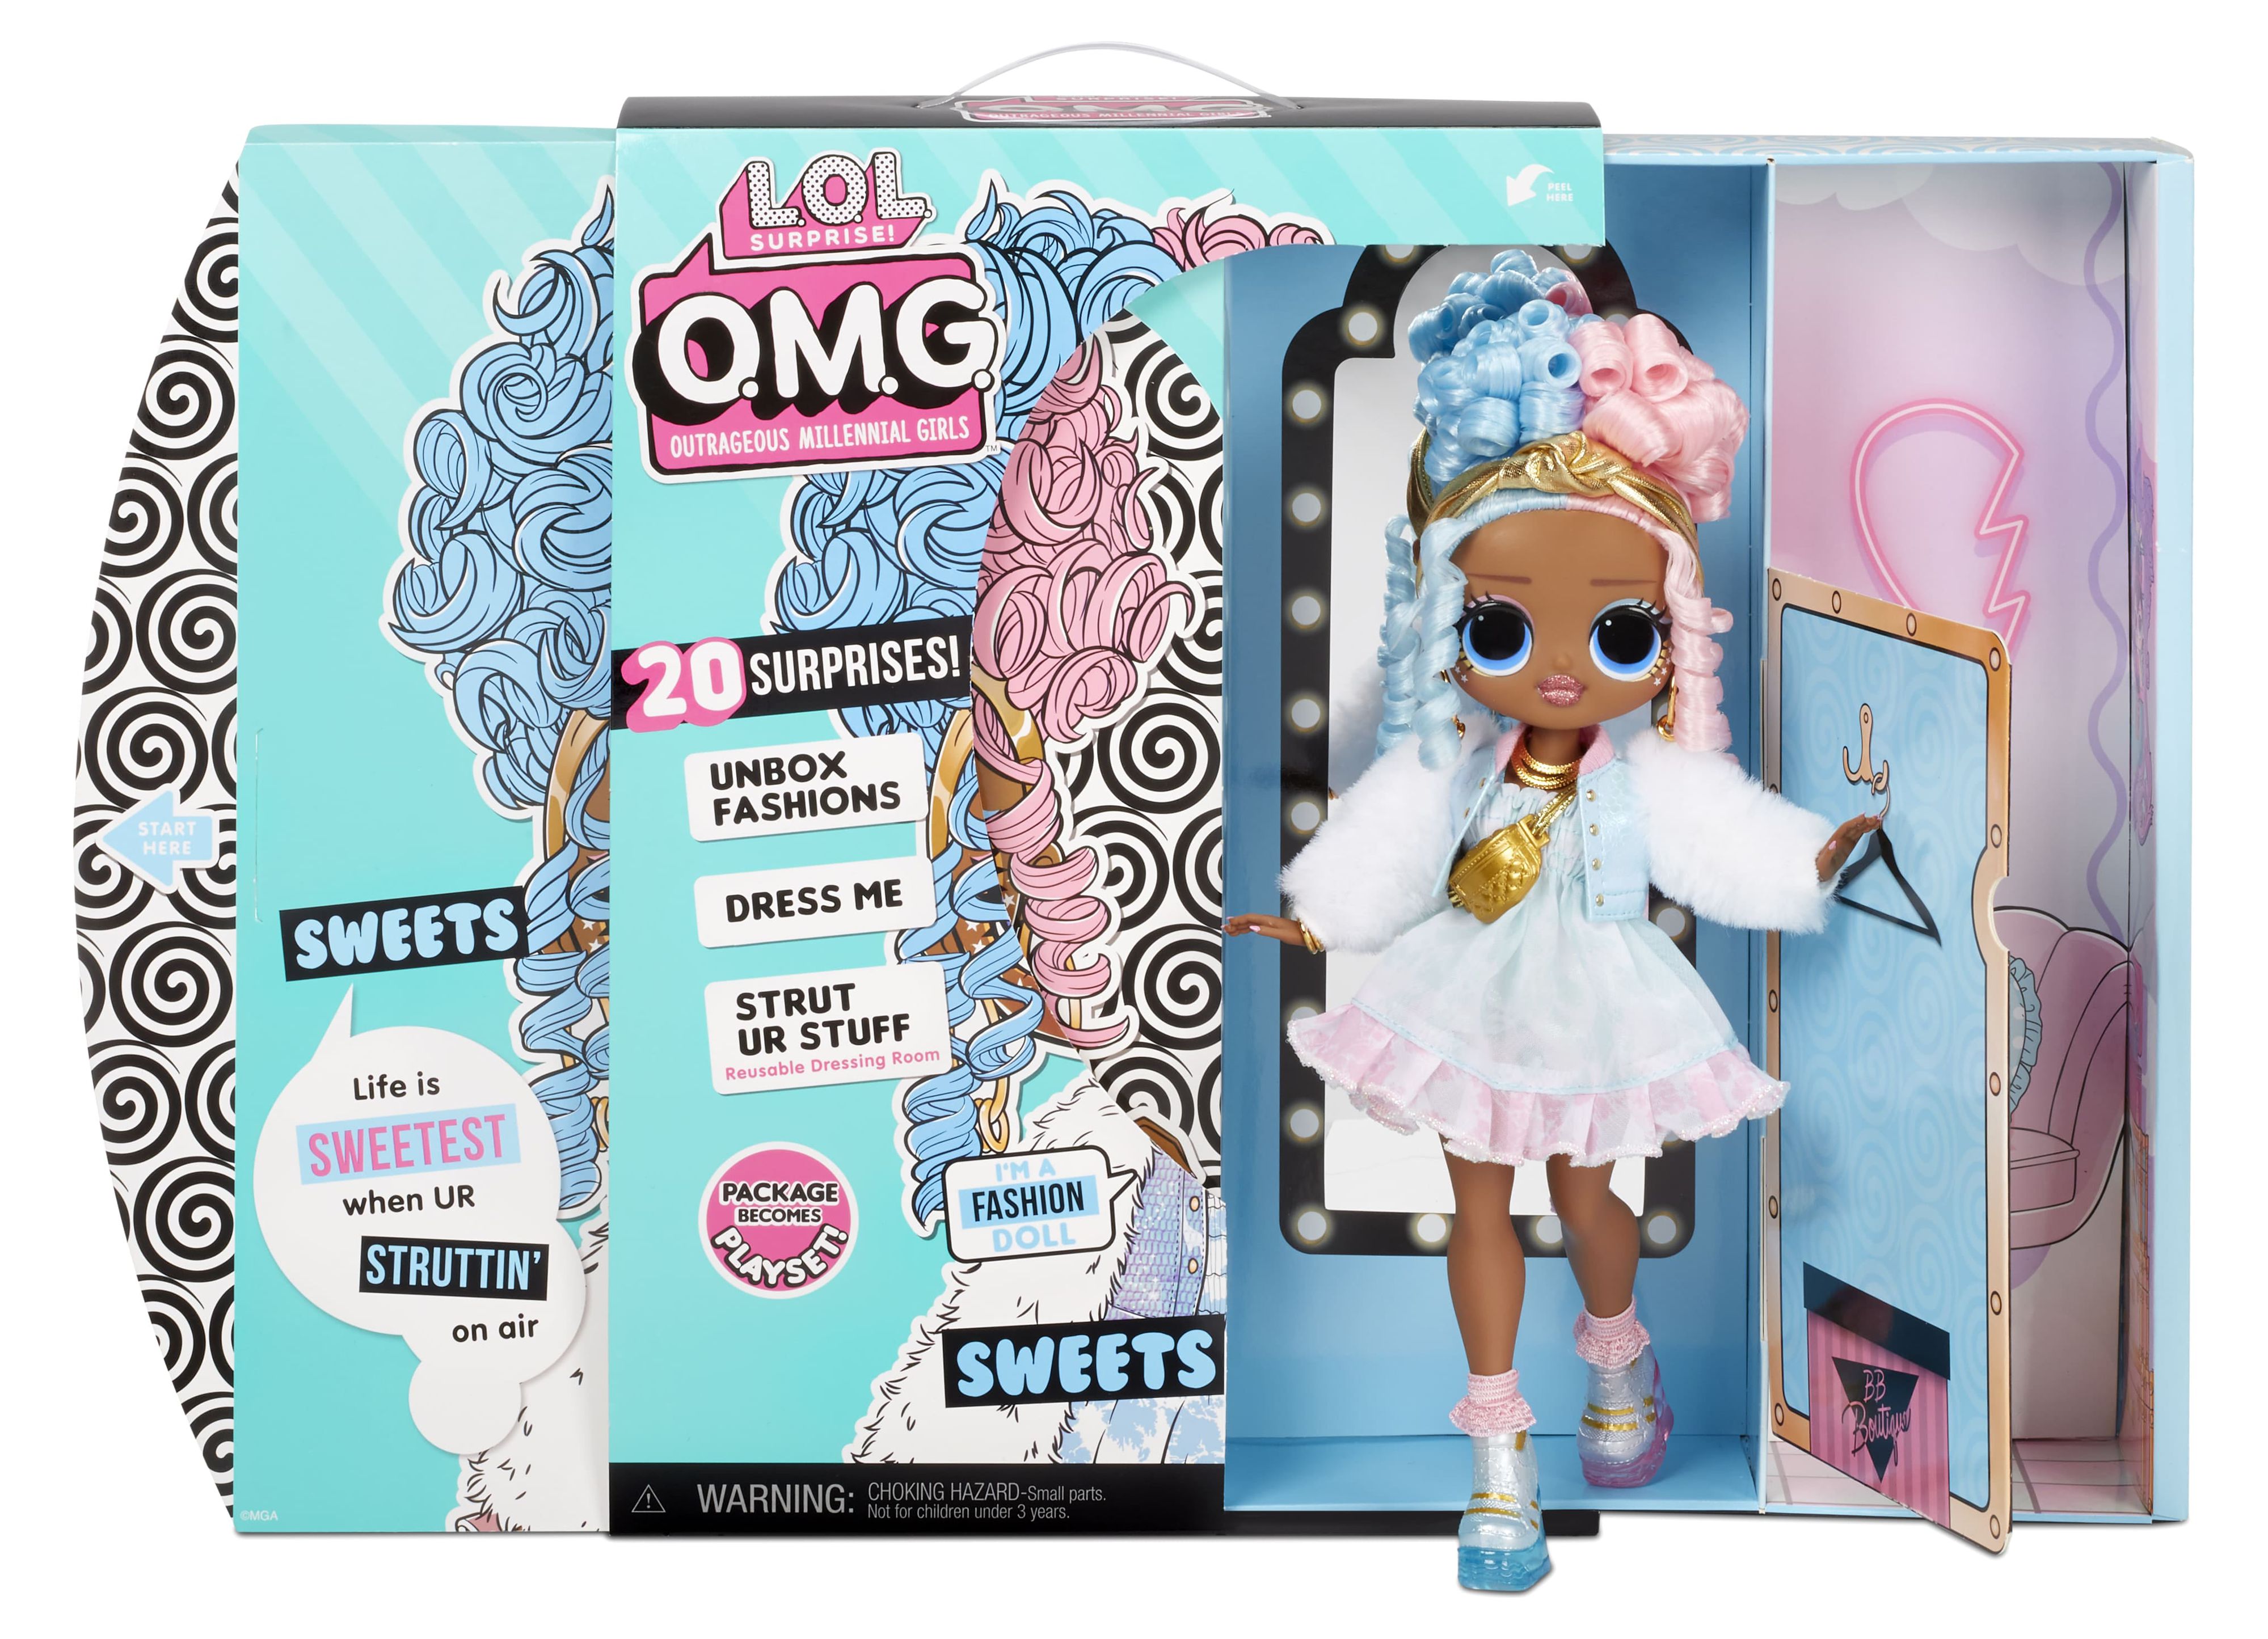 LOL Surprise OMG Sweets Fashion Doll - Dress Up Doll Set with 20 Surprises for Girls and Kids 4+ - image 3 of 8